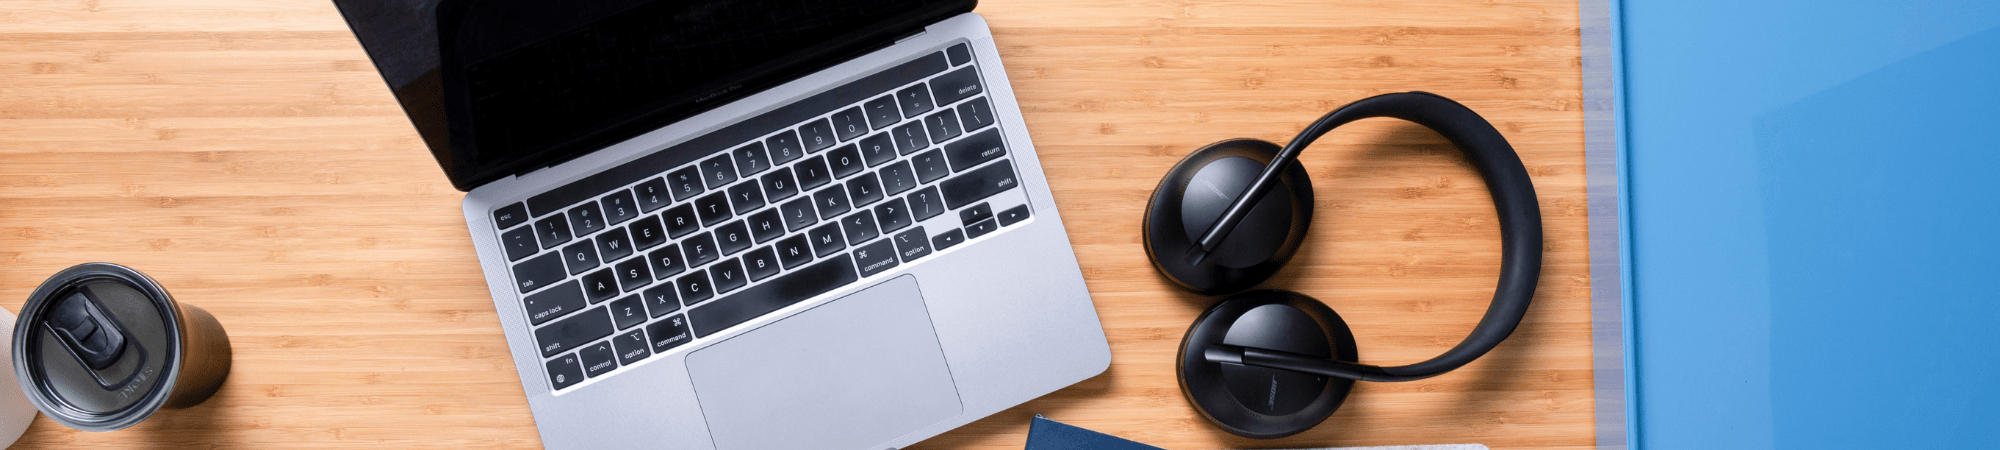 Laptop and headphones on office desk 